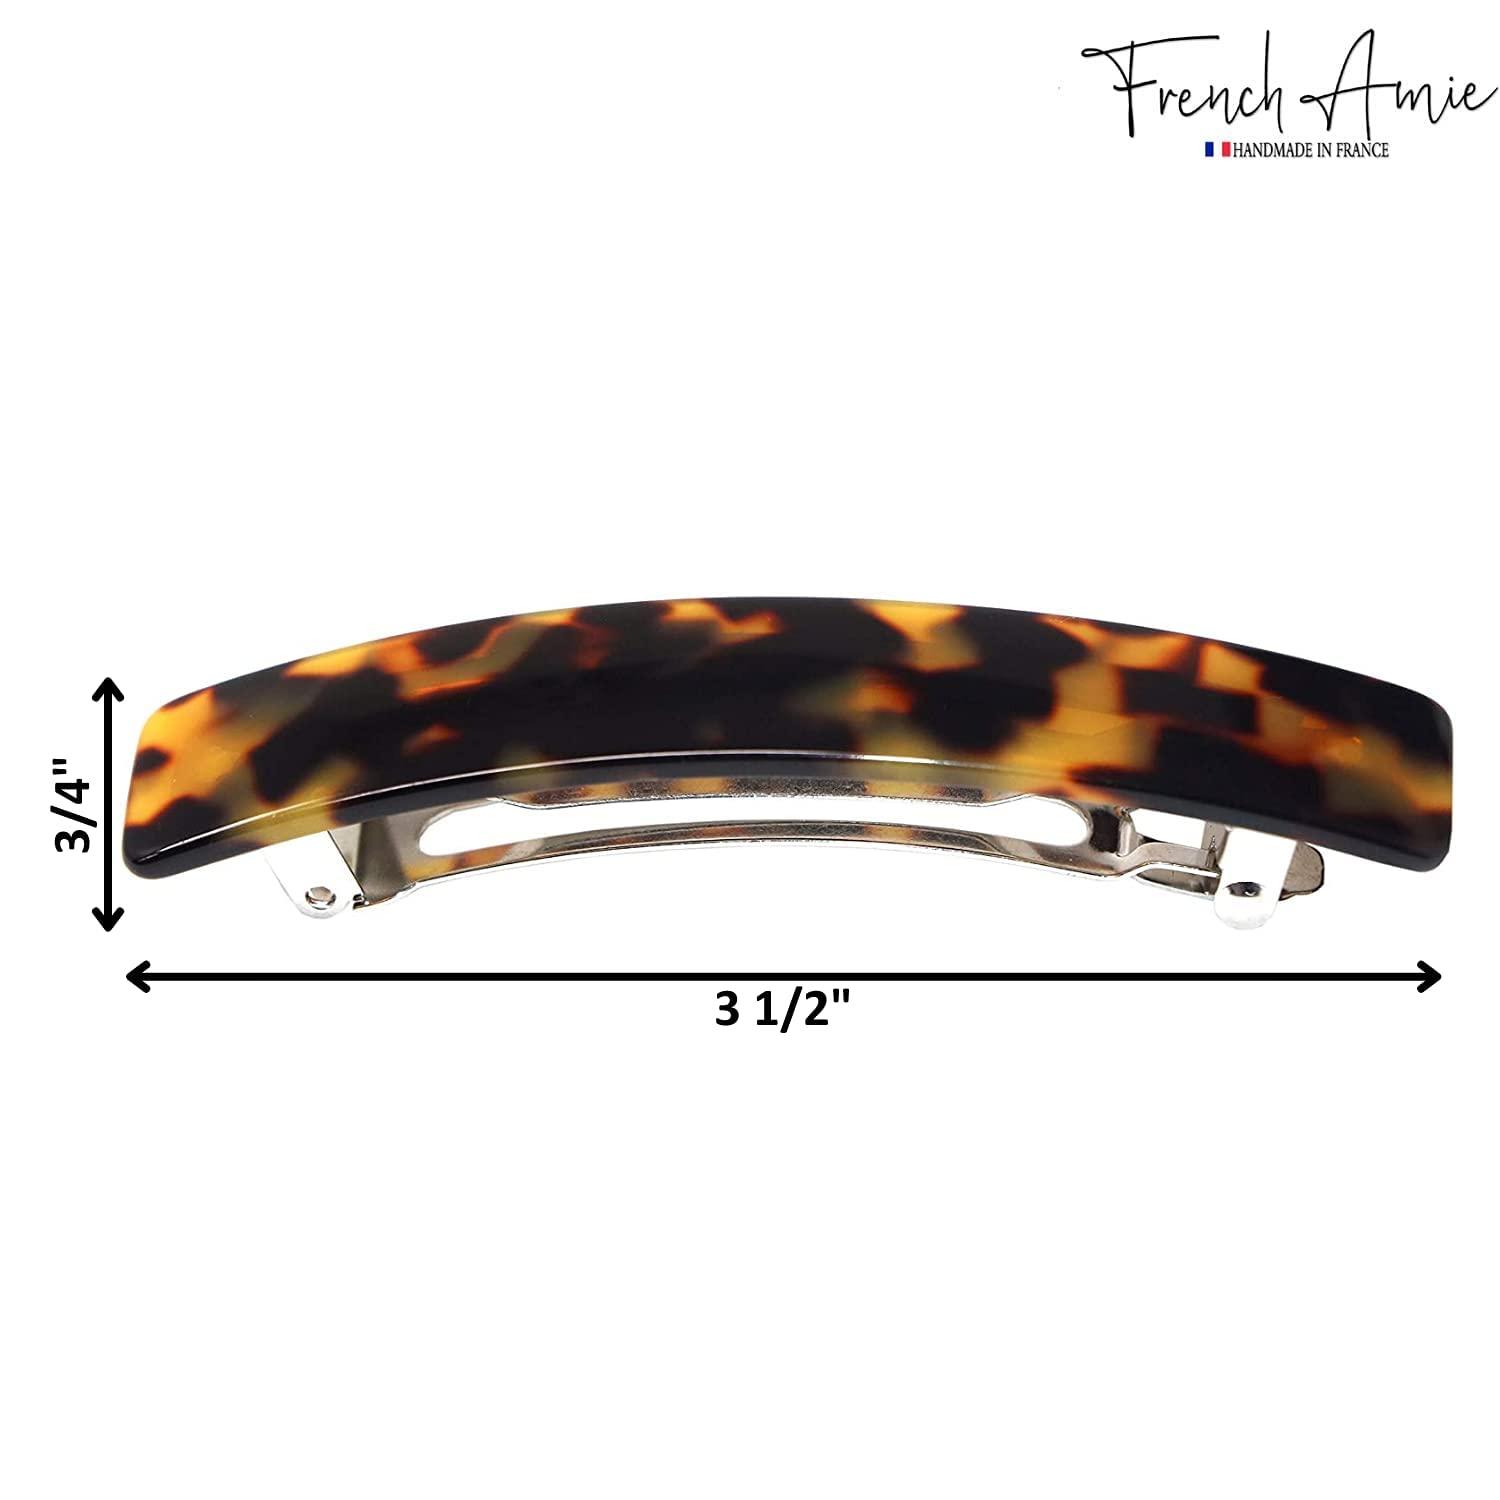  French Amie Rectangular Gold Glitter 3 1/4” Strong Celluloid  Acetate Handmade Automatic Hair Clip Barrette with Golden Clasp for Women  and Girls, Made in France : Beauty & Personal Care